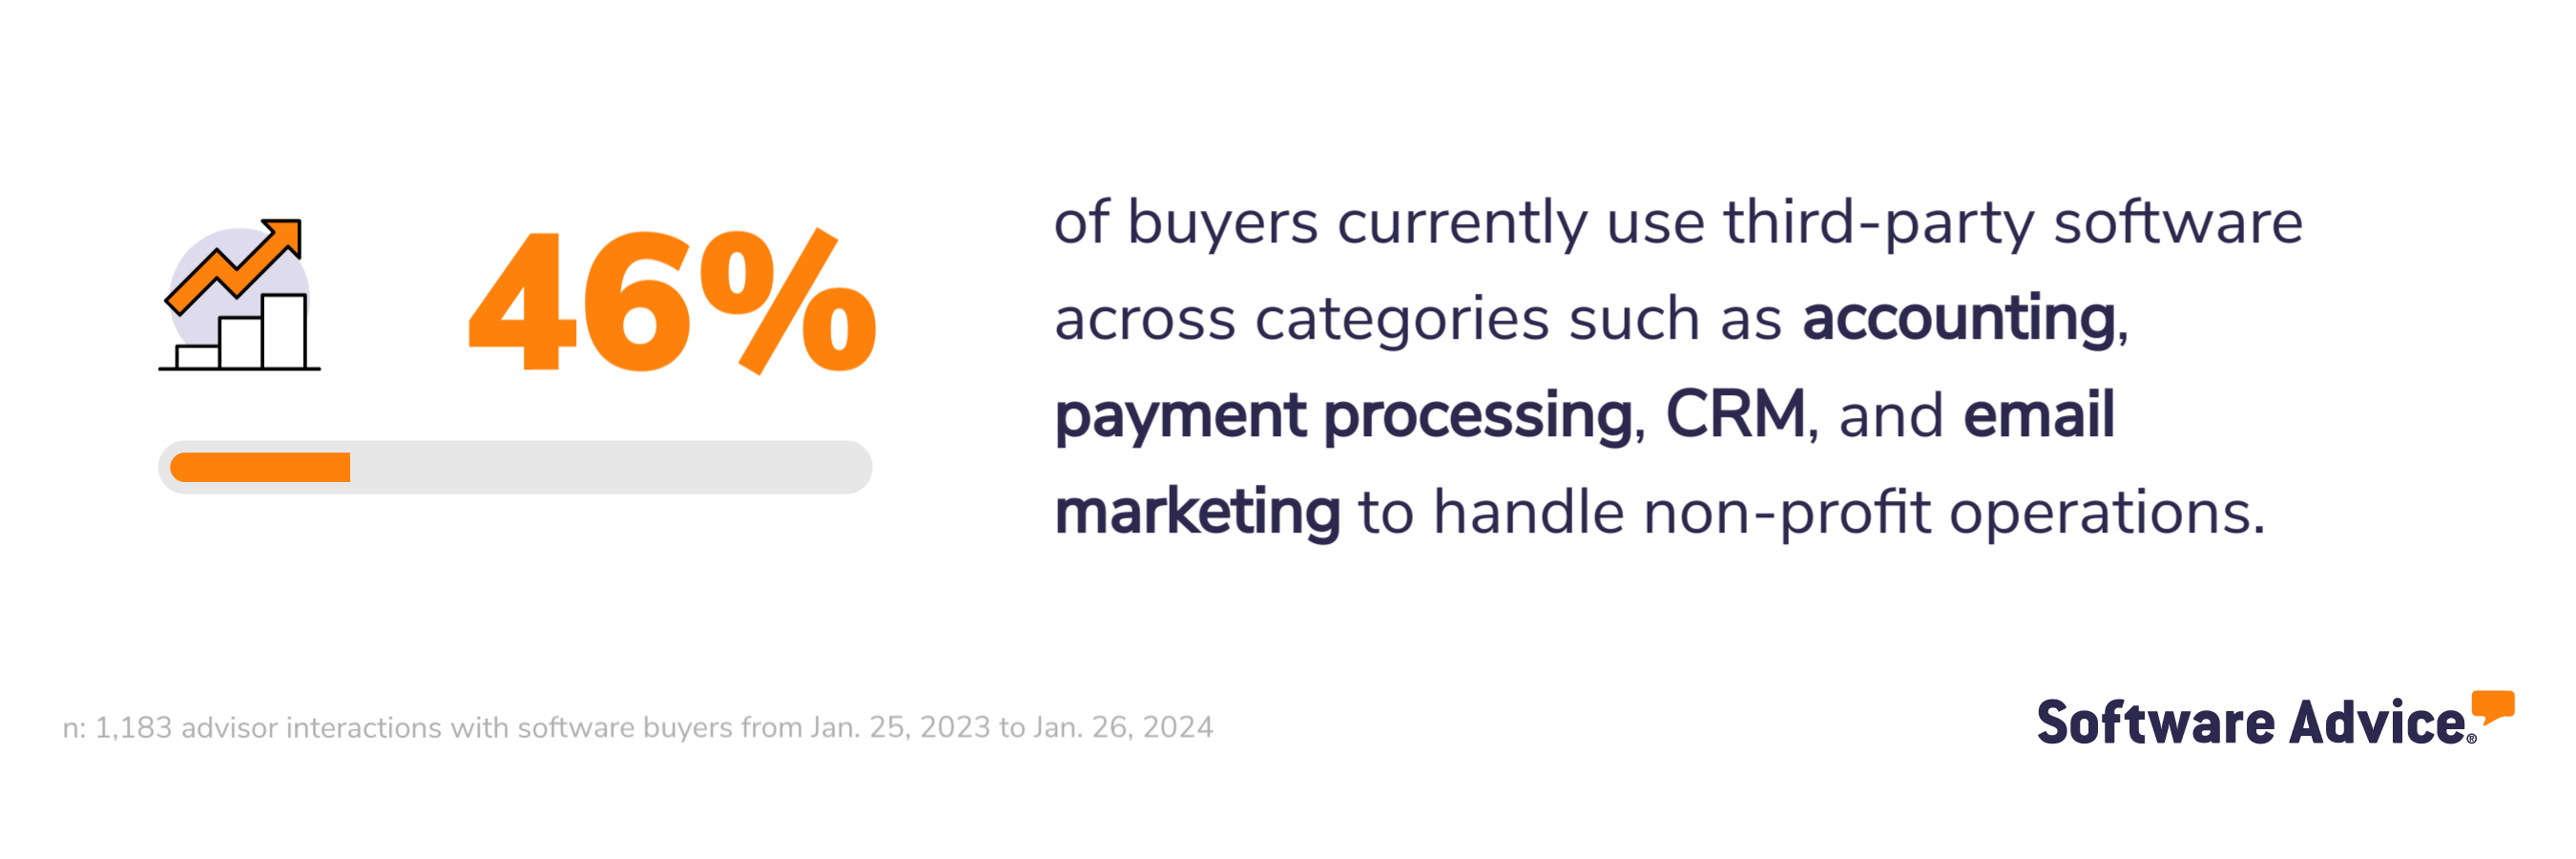 Software Advice graphic: 46% of buyers use third-party software across accounting, payment processing, CRM, and email marketing to handle nonprofit operations